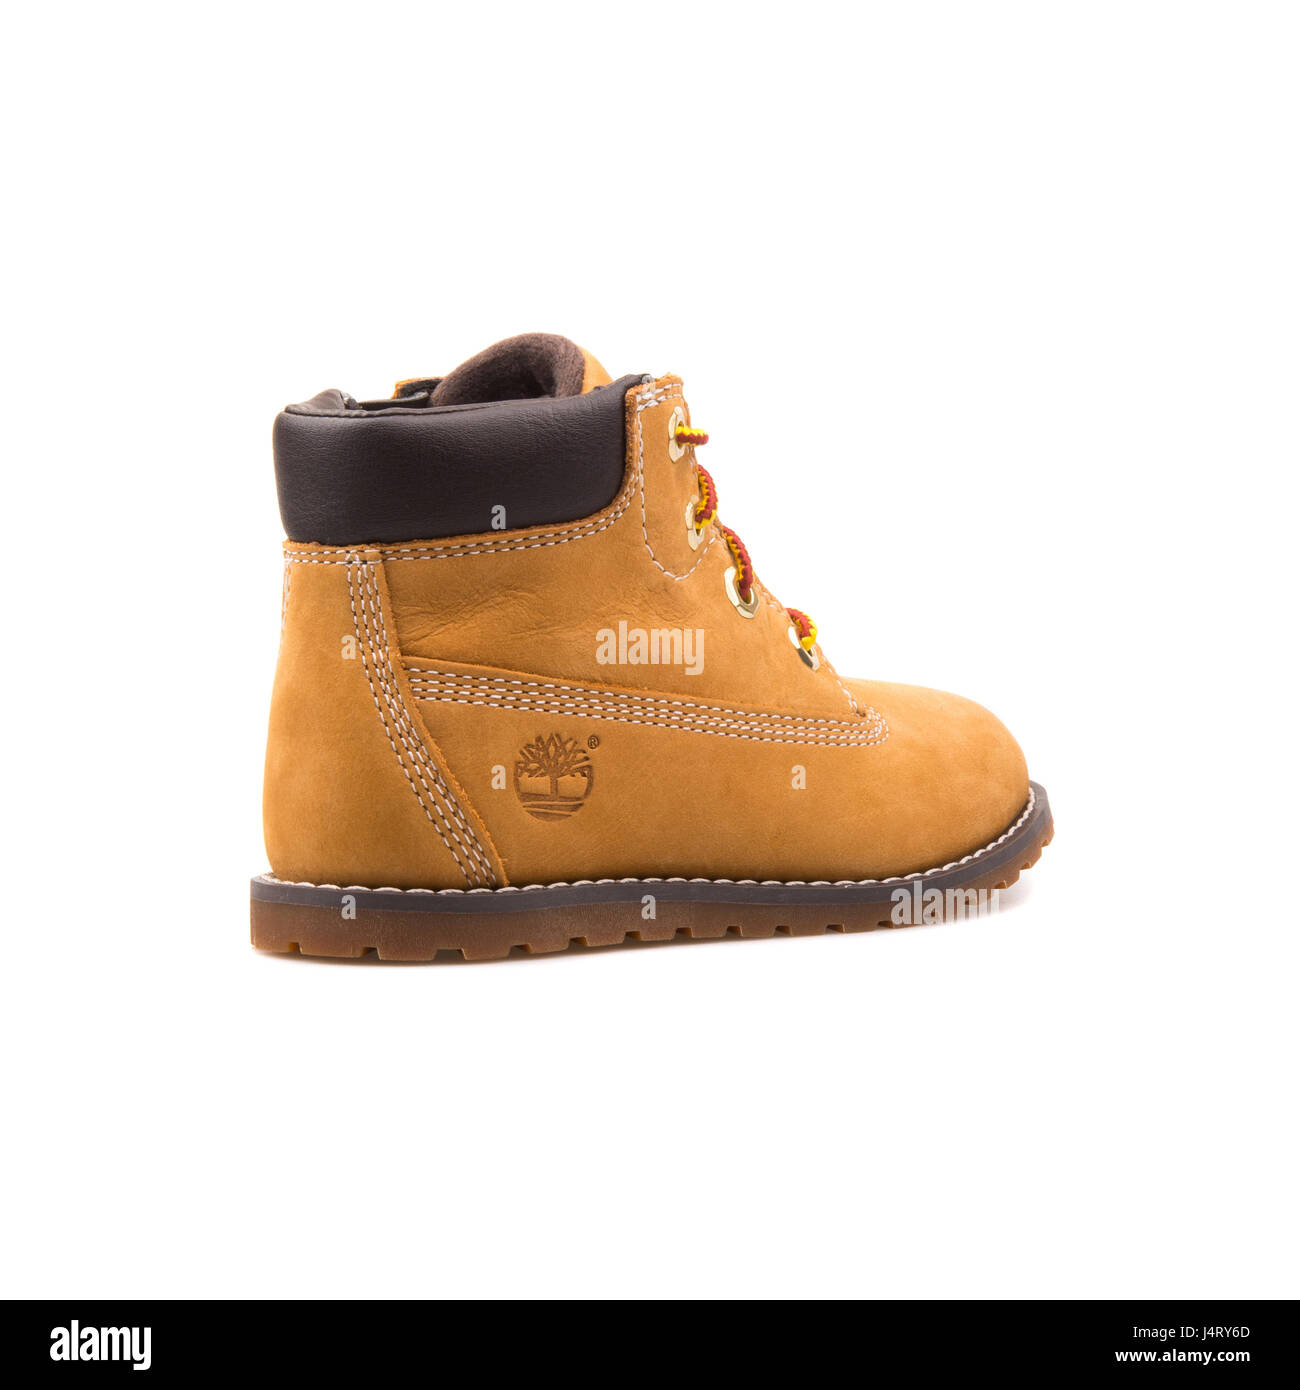 Timberland Boot High Resolution Stock Photography and Images - Alamy